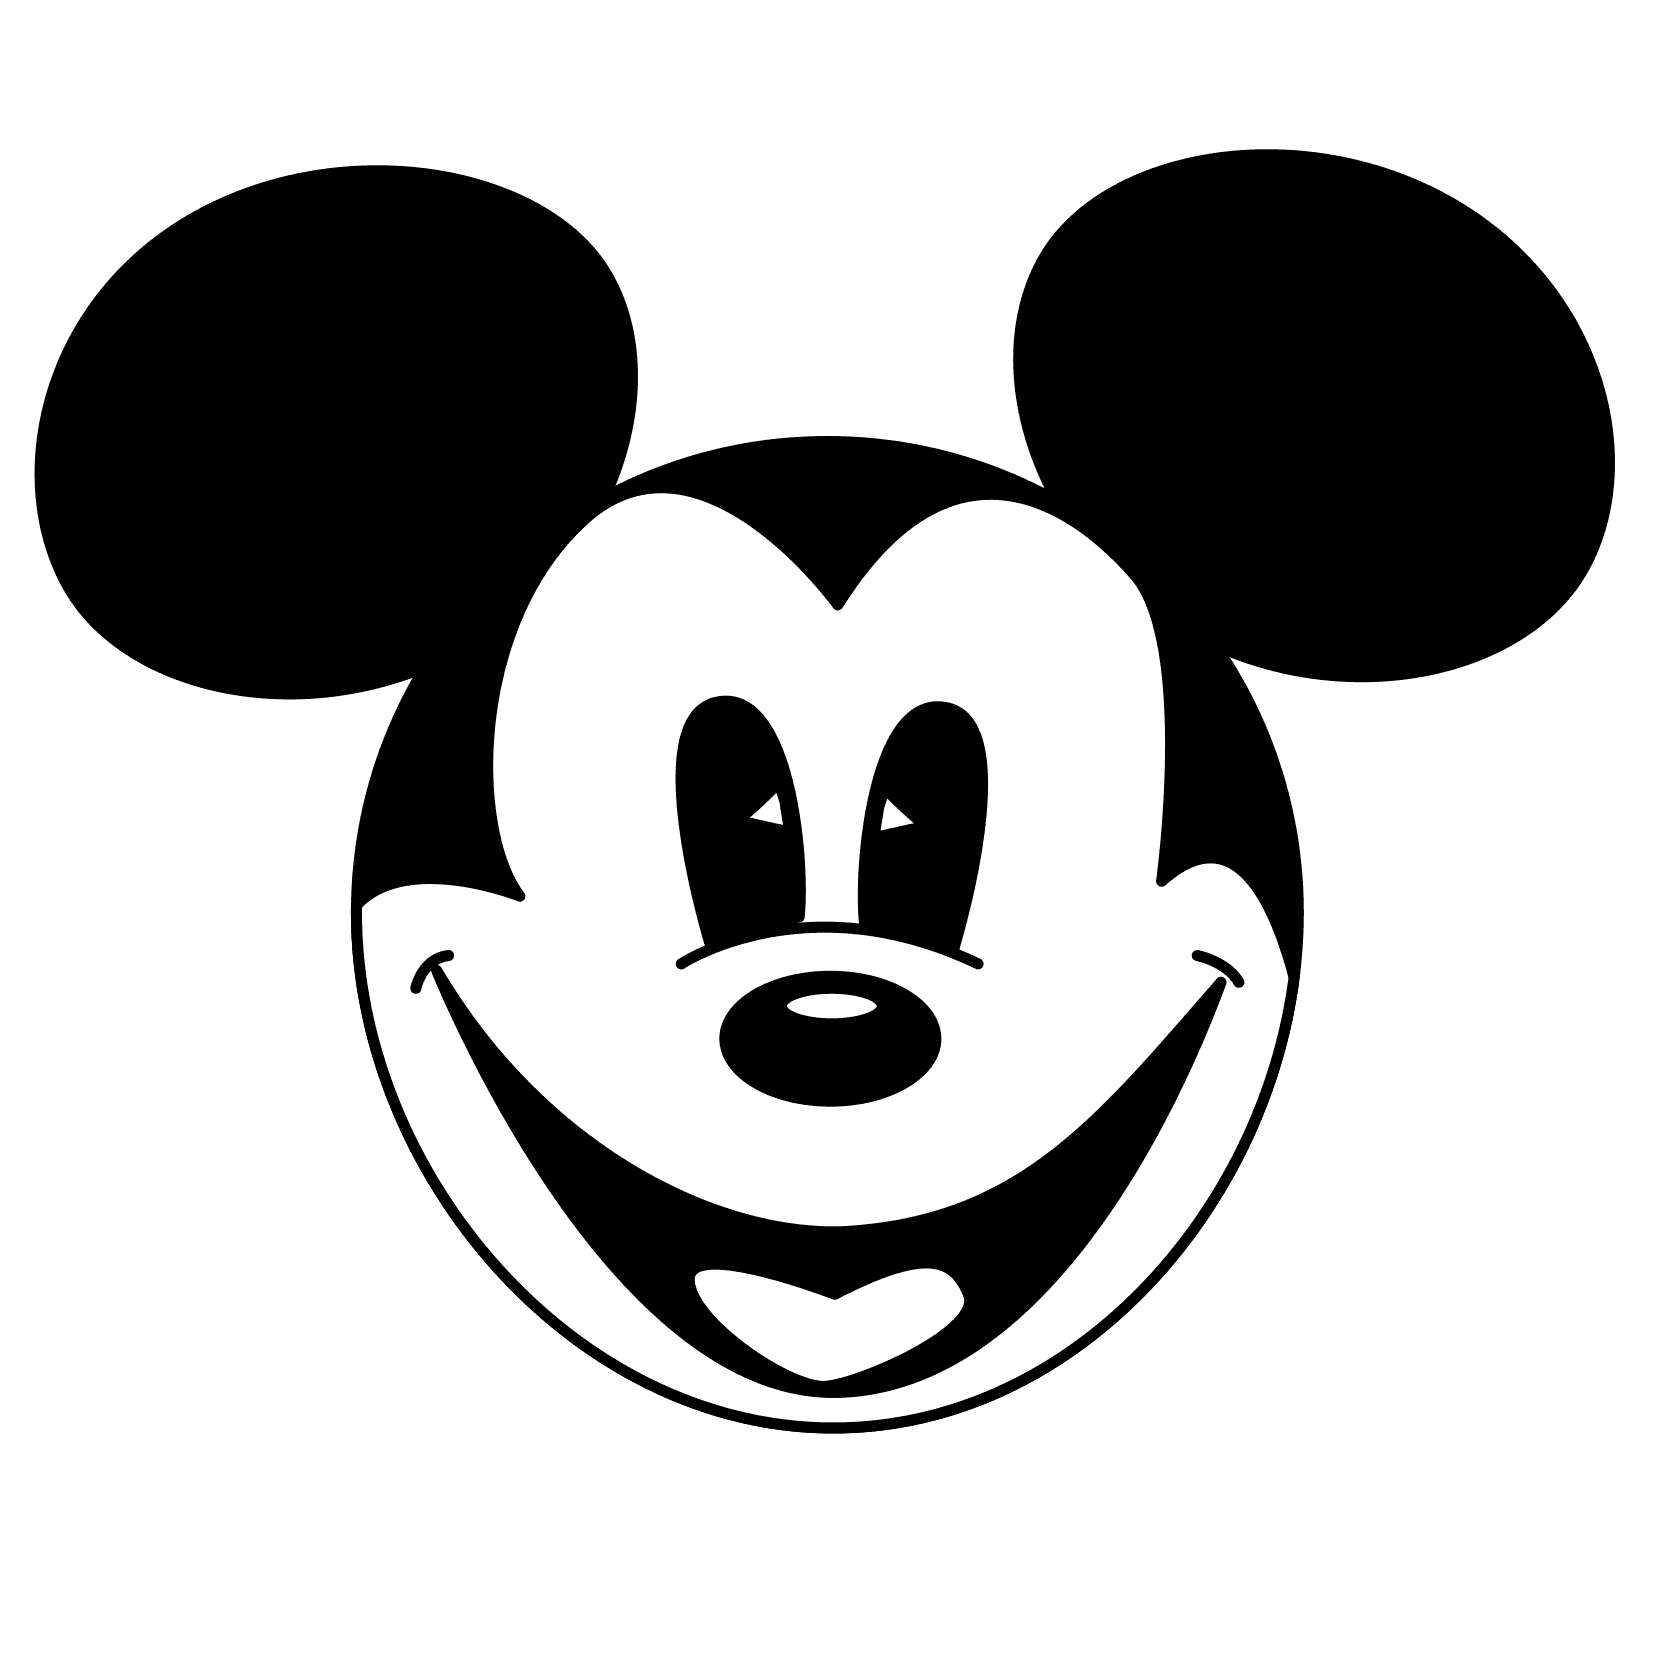 Mickey Mouse Face 1149 Hd Wallpapers in Cartoons - Imagesci.